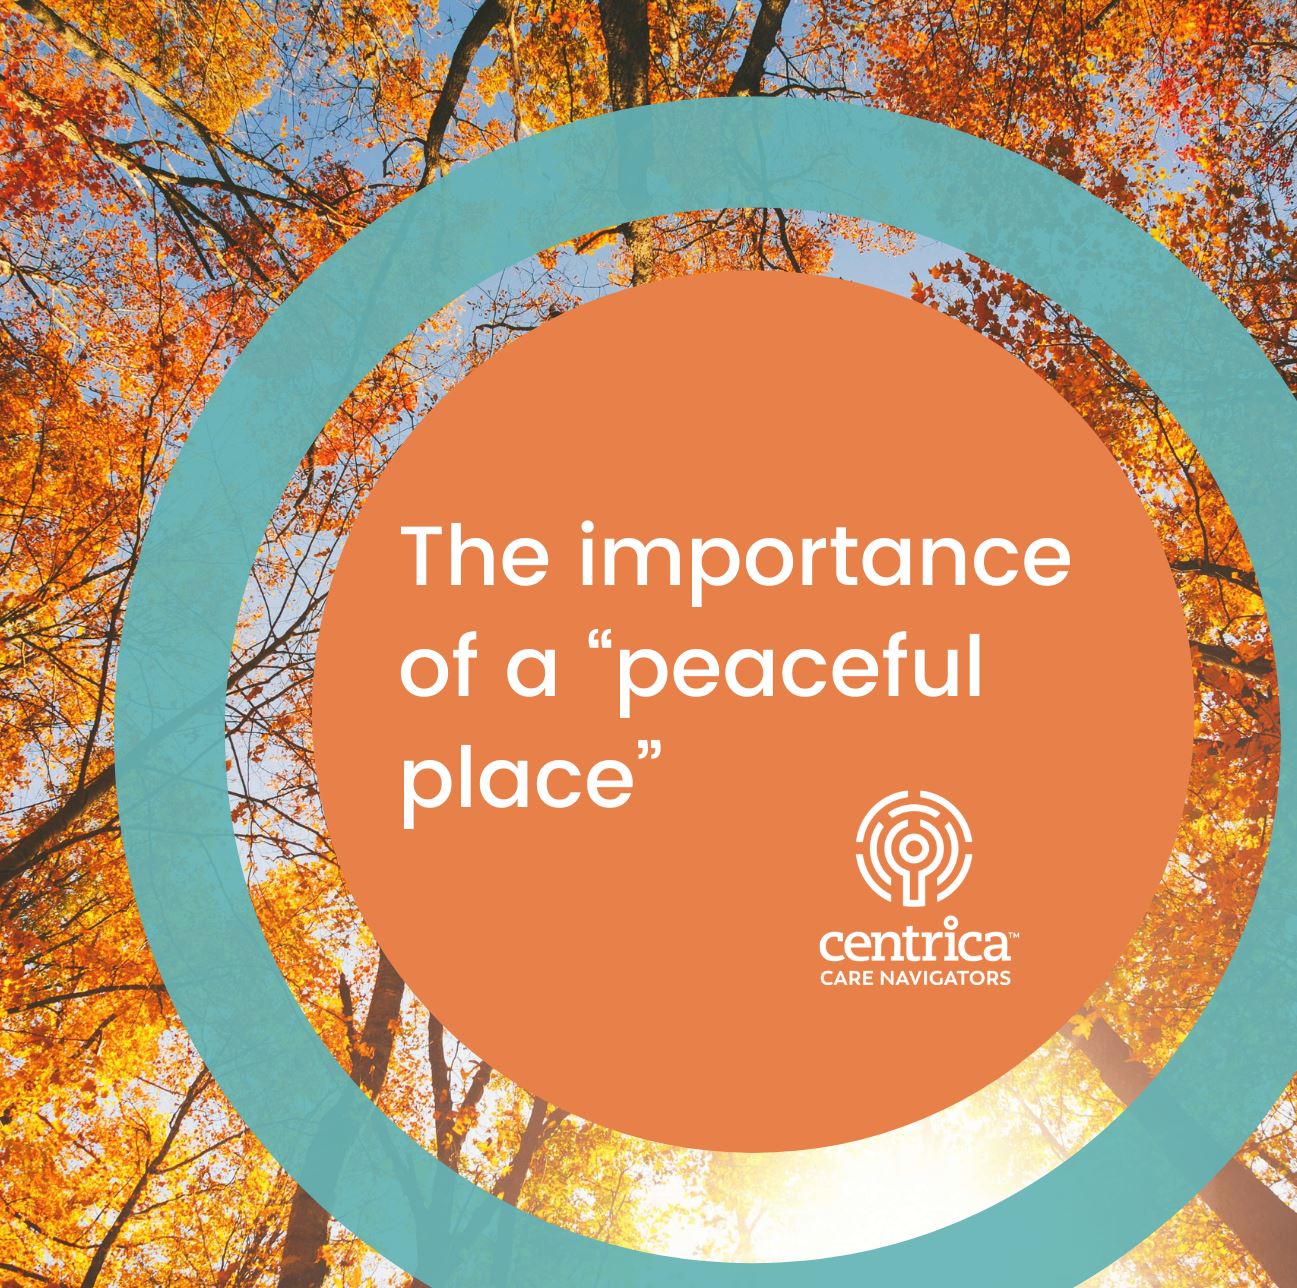 The importance of a “peaceful place”